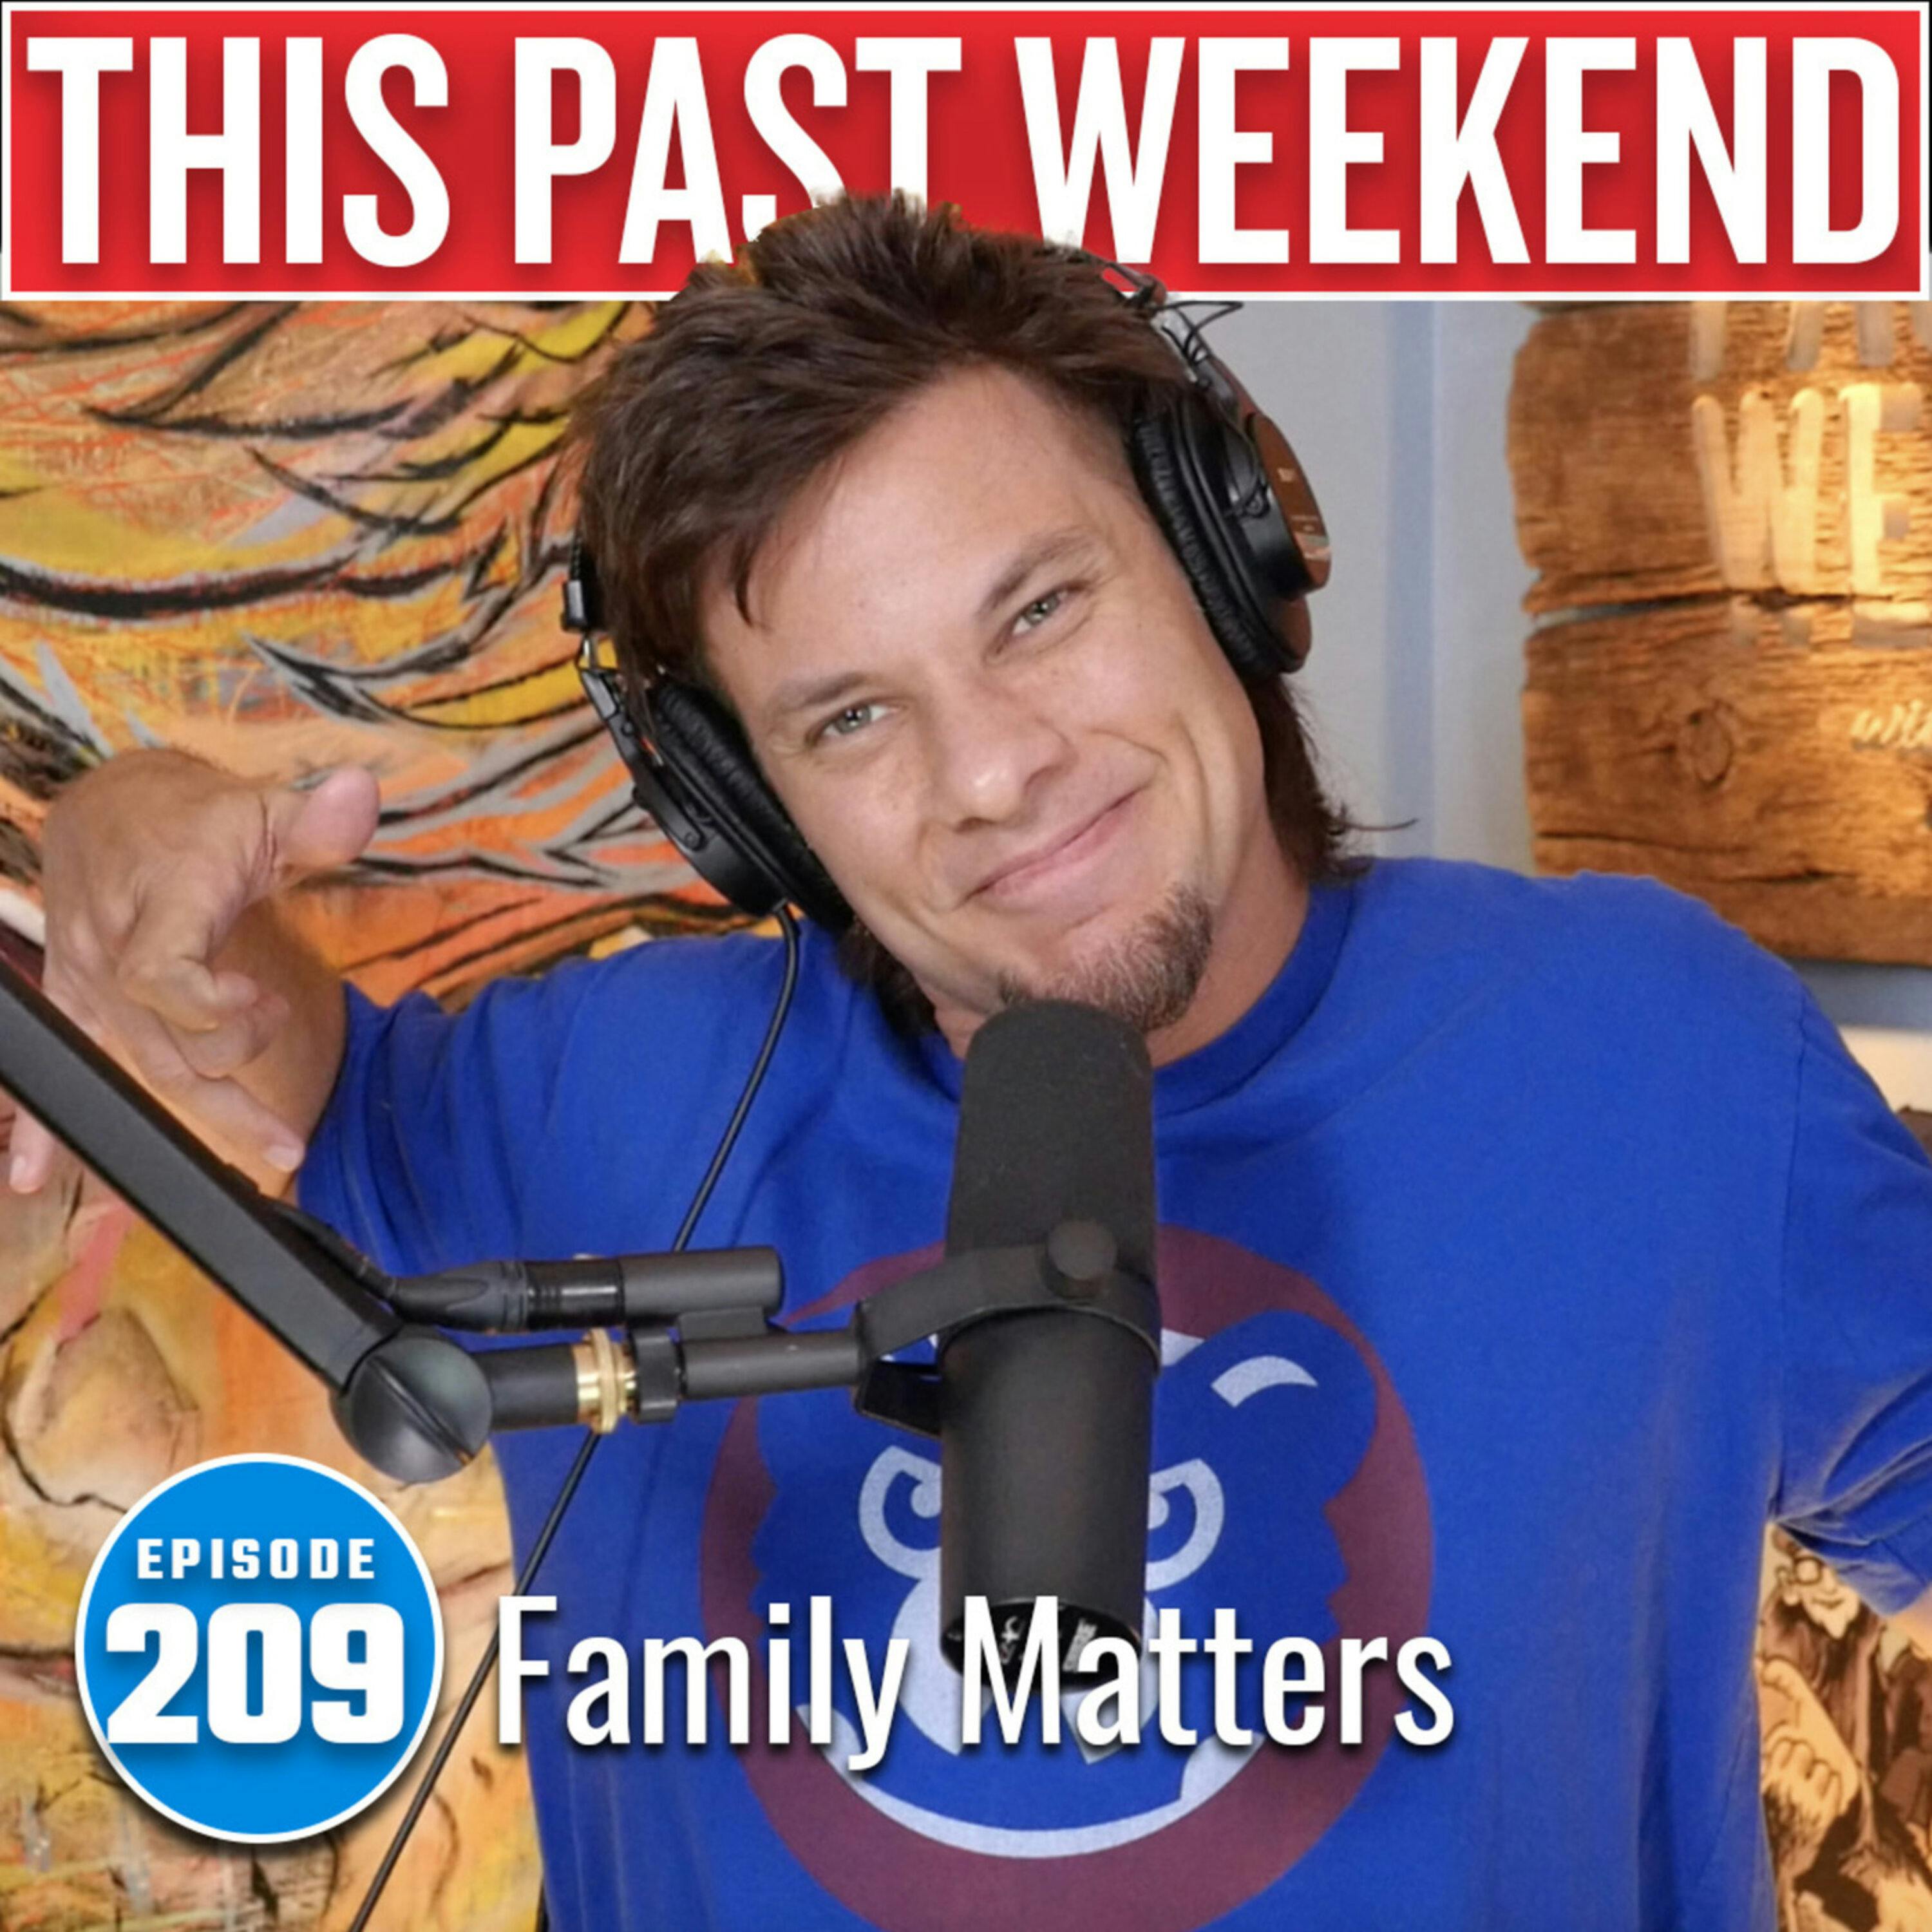 Family Matters | This Past Weekend #209